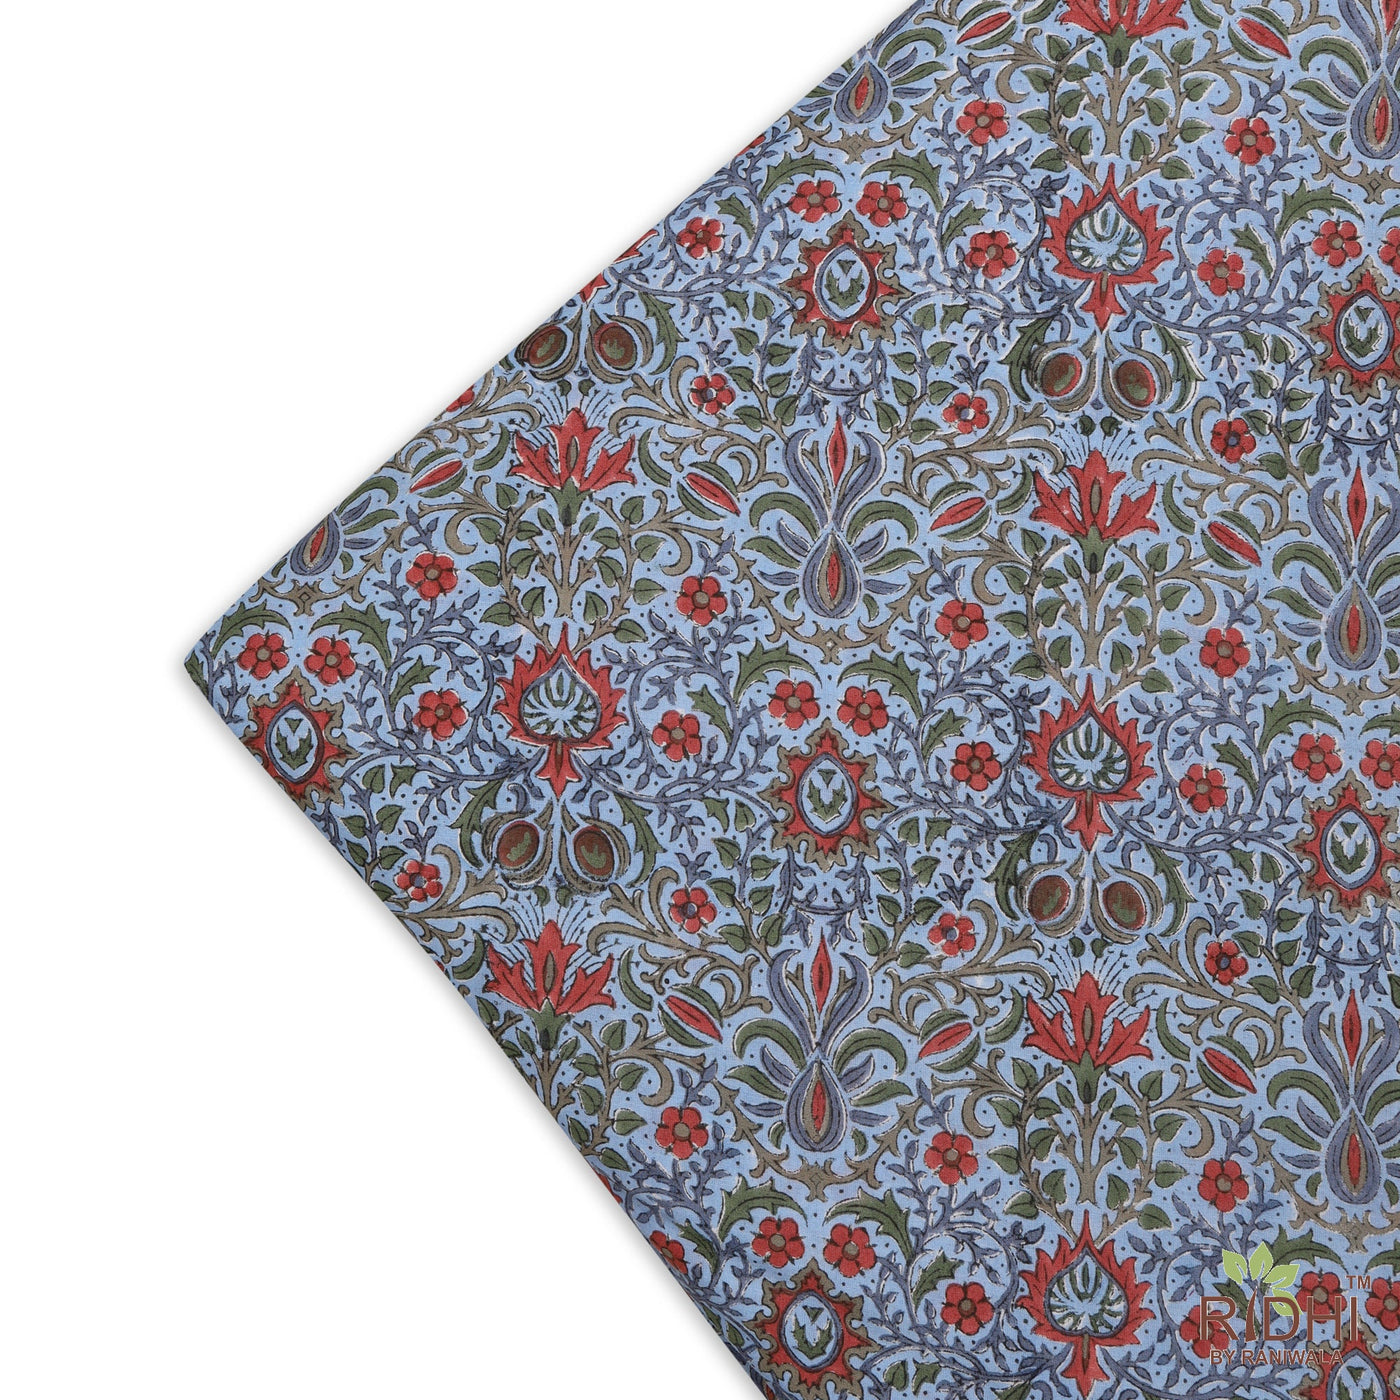 Fabricrush Airforce Blue, Army Green, Sangria Red Indian Hand Block floral Printed 100% Pure Cotton Cloth, Fabric by the yard, Fabric for Home Linen